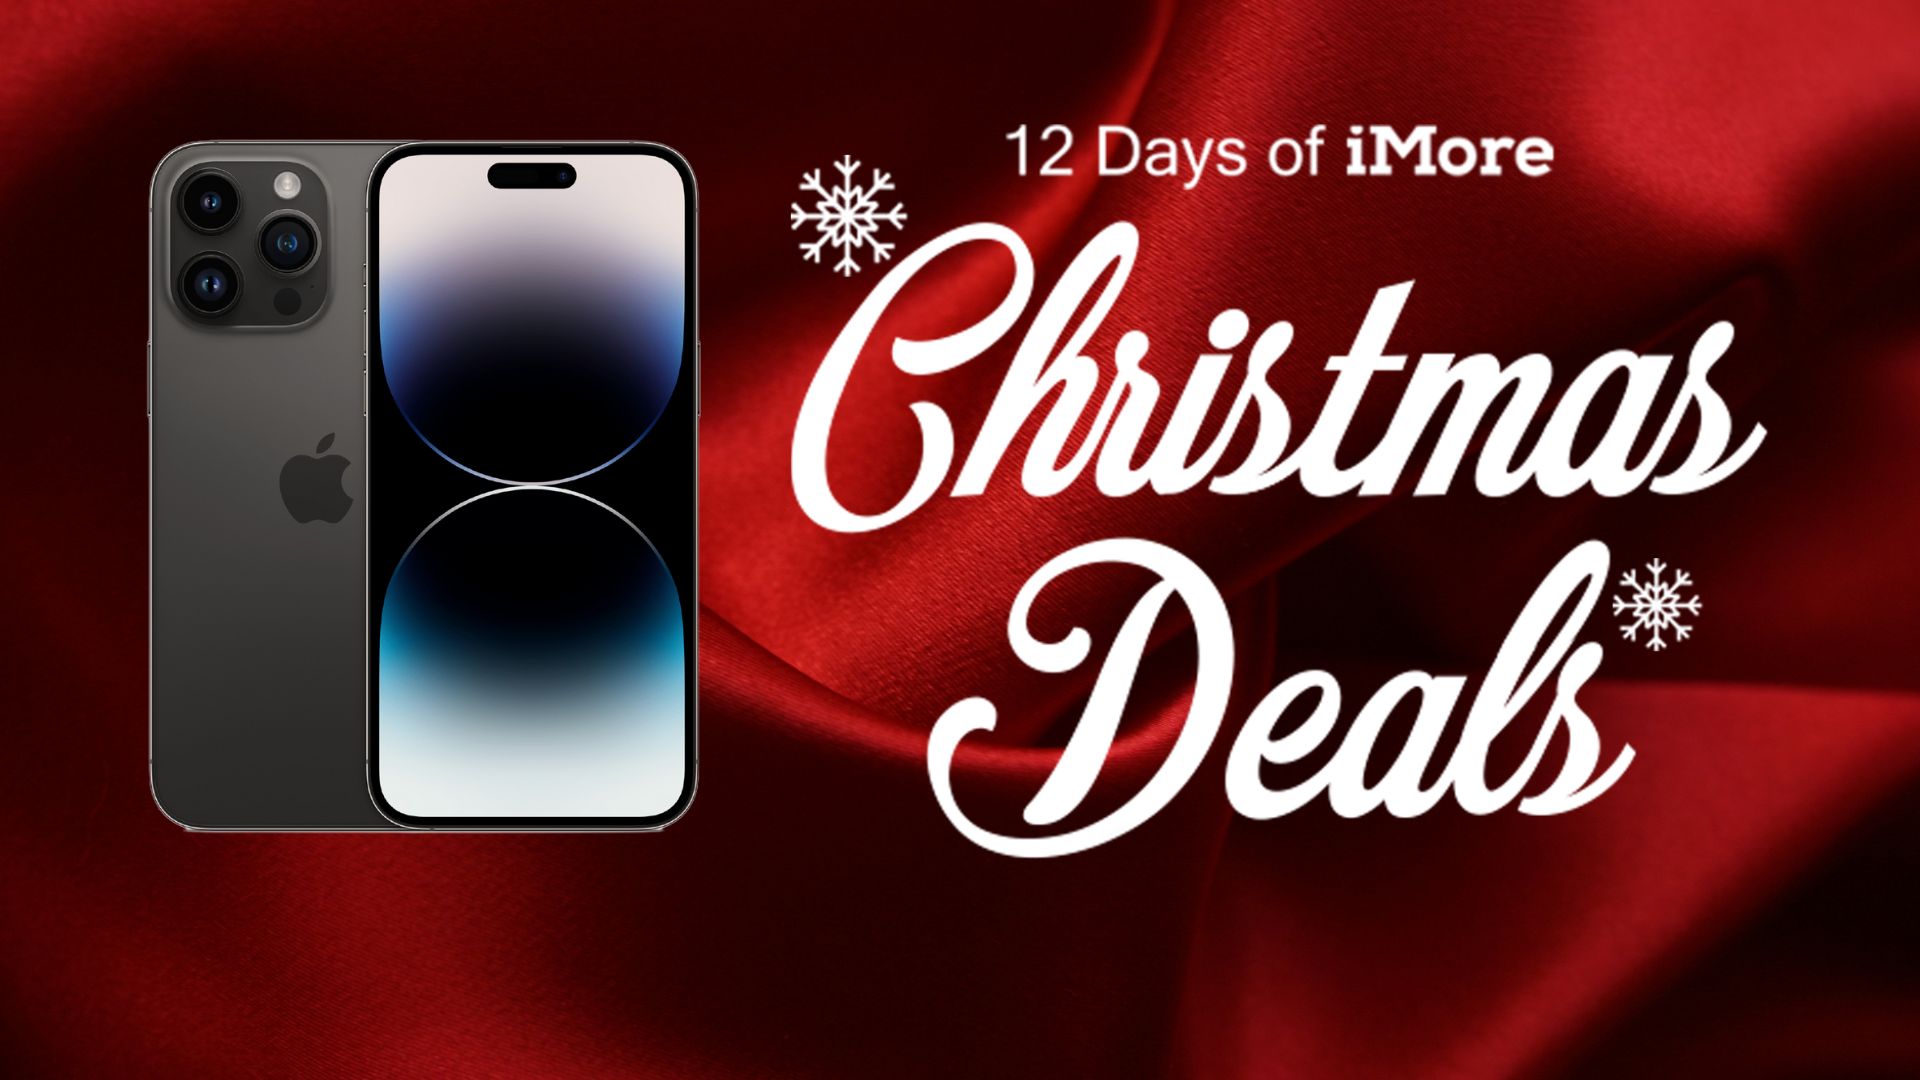 Trade in and save up to 1,000 on an iPhone 14 Pro at Verizon and you